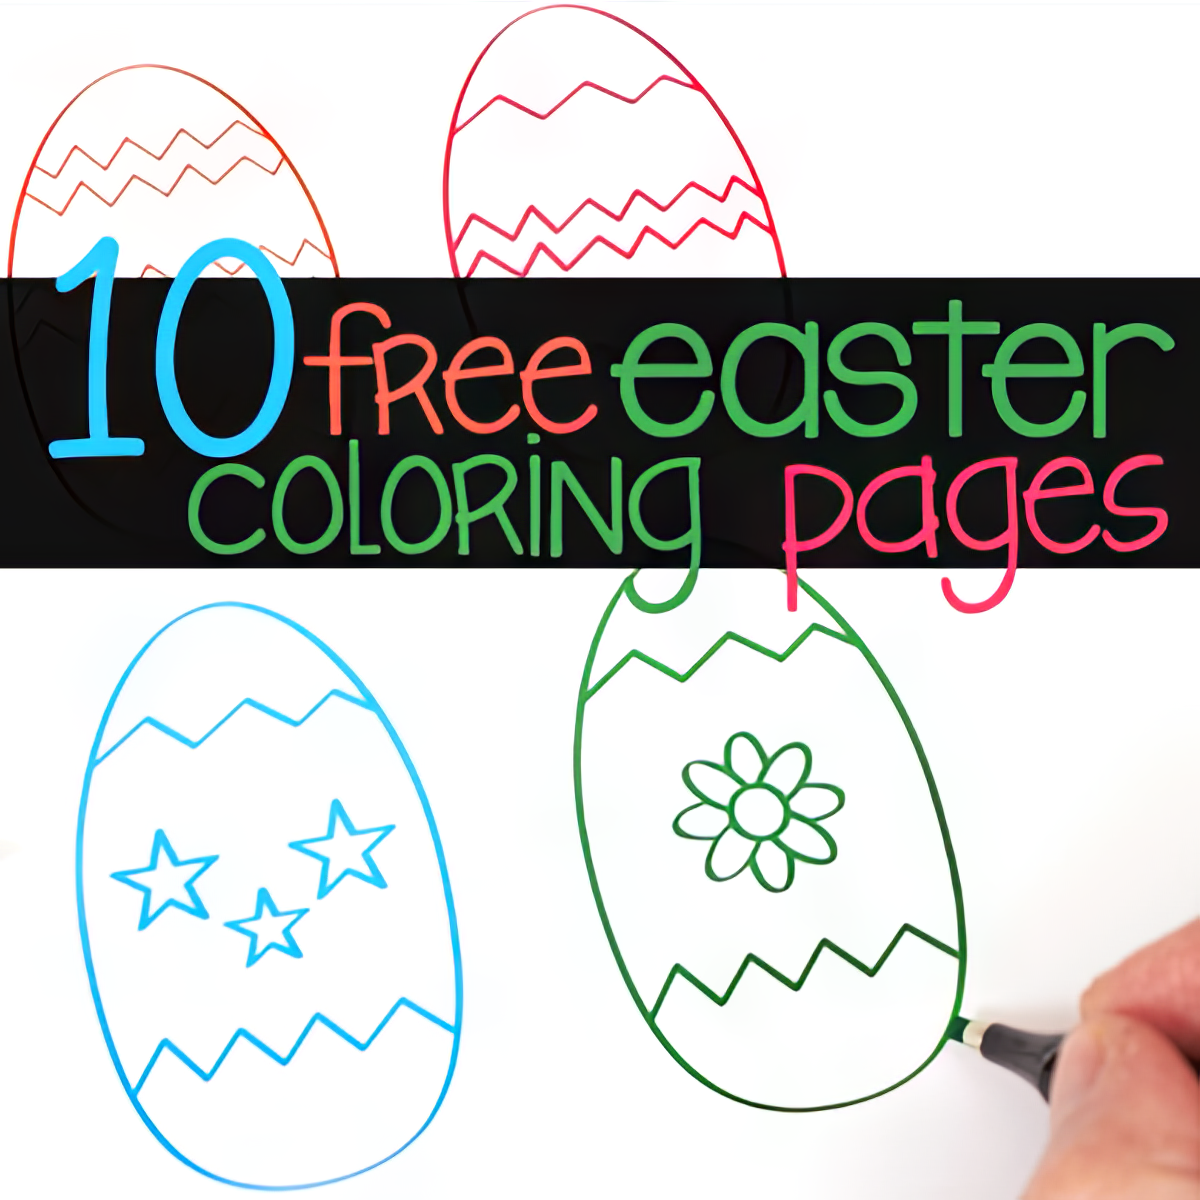 10 Free Easter Coloring Pages